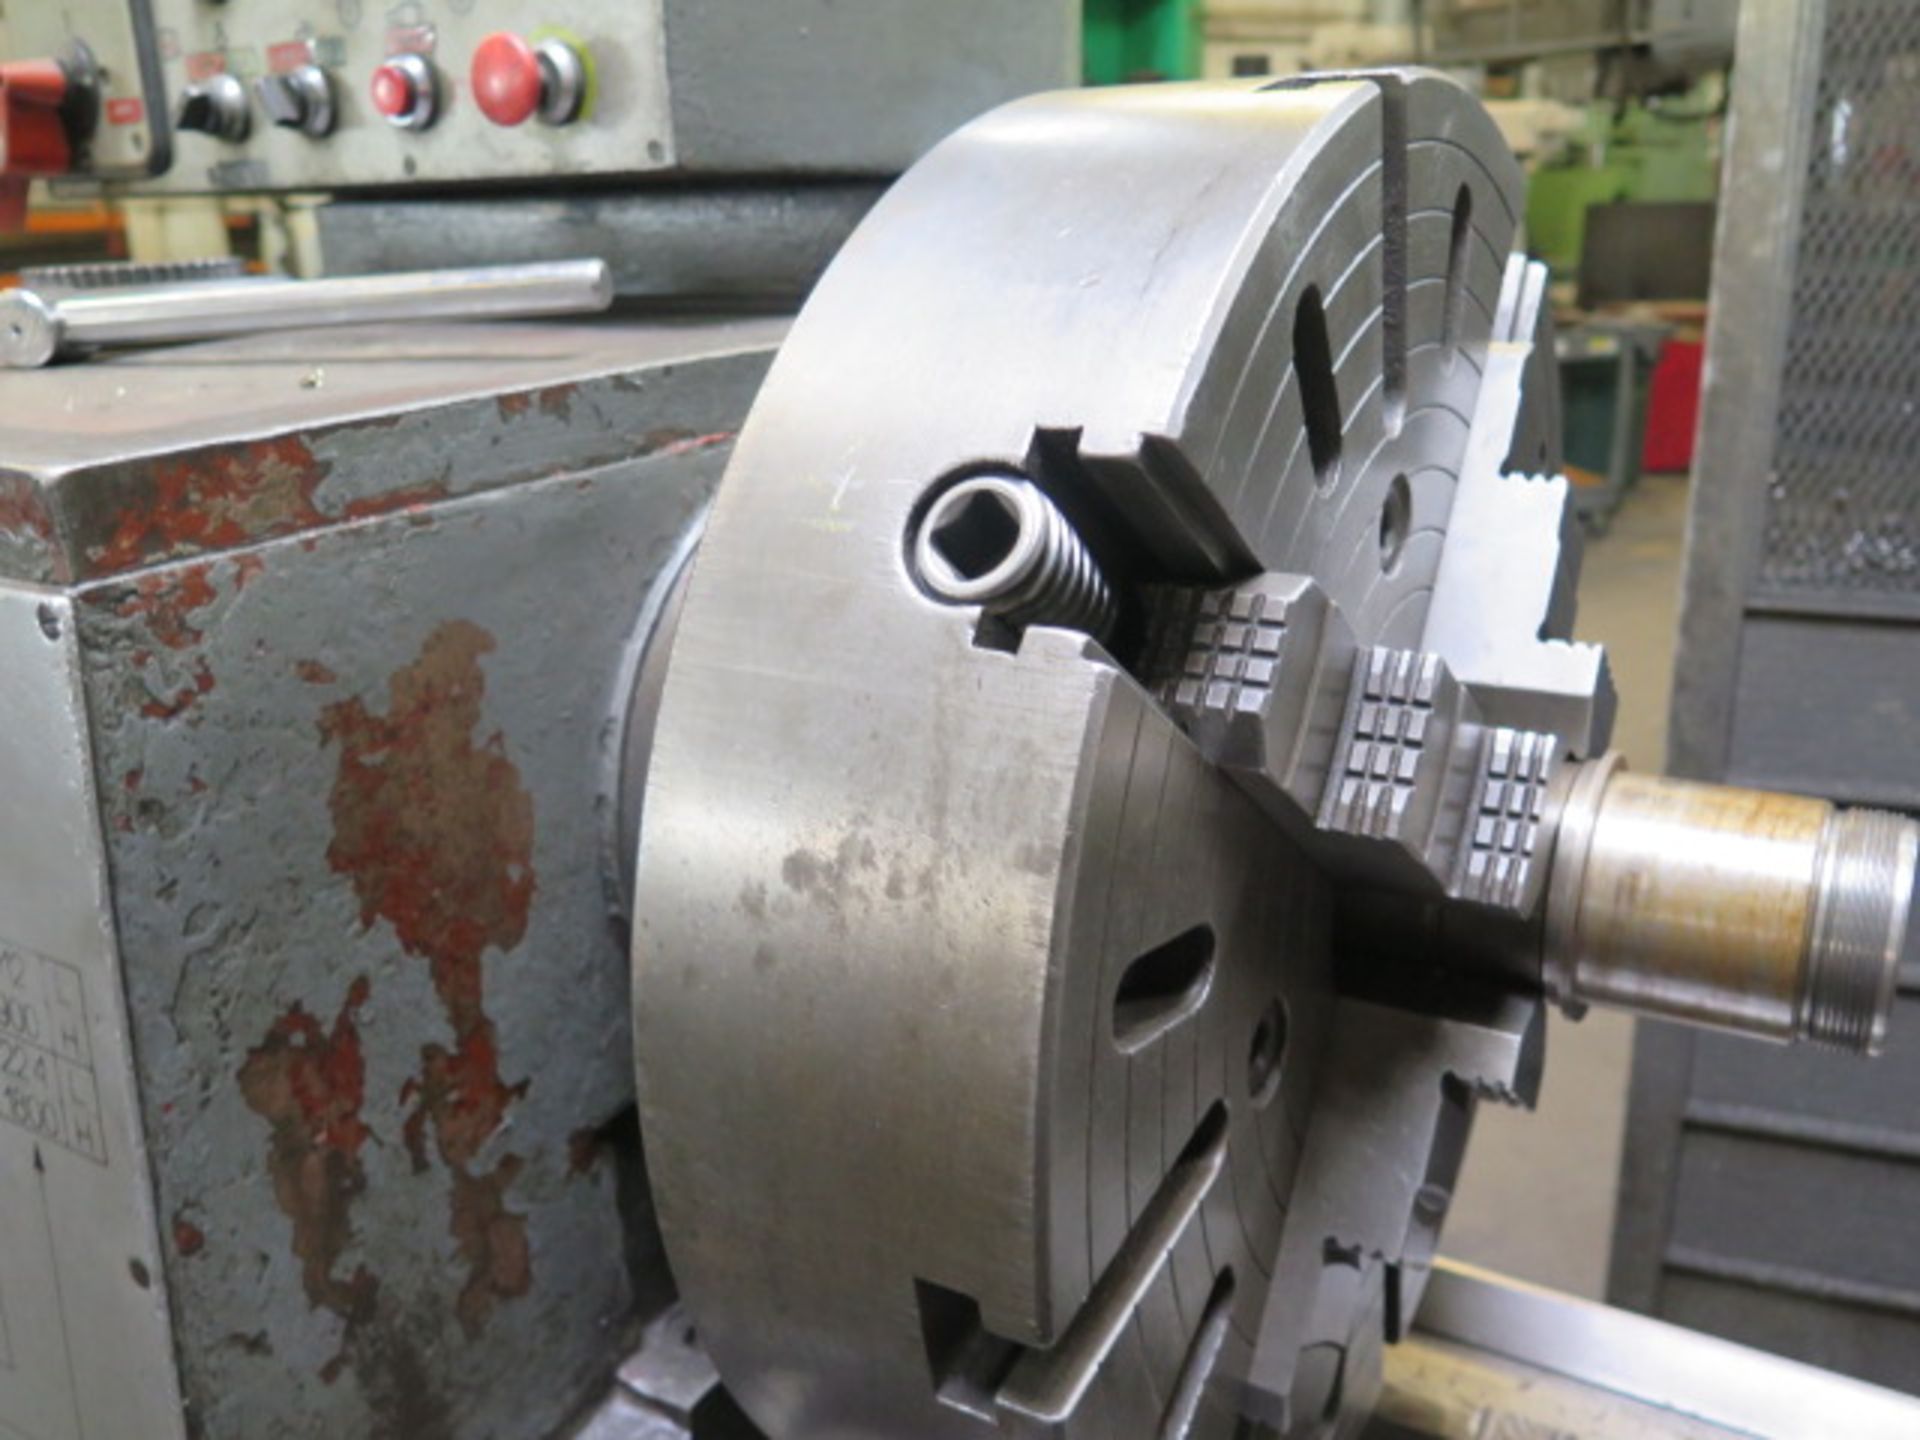 Polamco TUR-63 Big-Bore 25” x 120” Geared Head Gap Bed Lathe s/n 41189 w/ Mitutoyo DRO, SOLD AS IS - Image 6 of 14